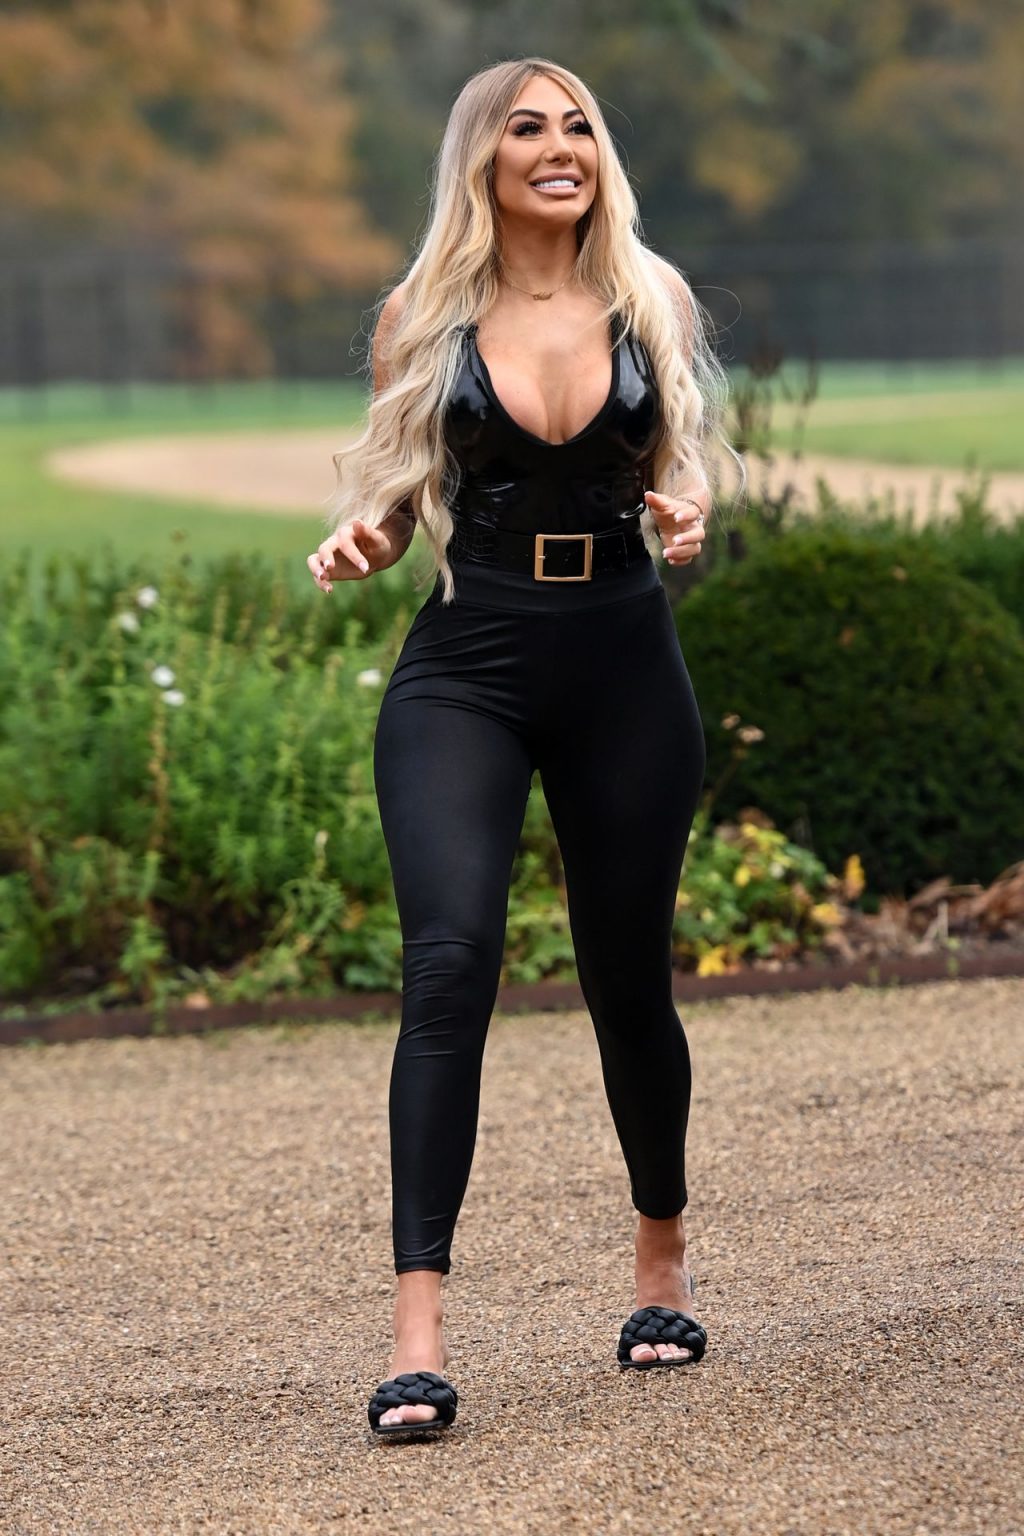 Chloe Ferry Shows Off Her Boobs in Sussex (30 Photos)